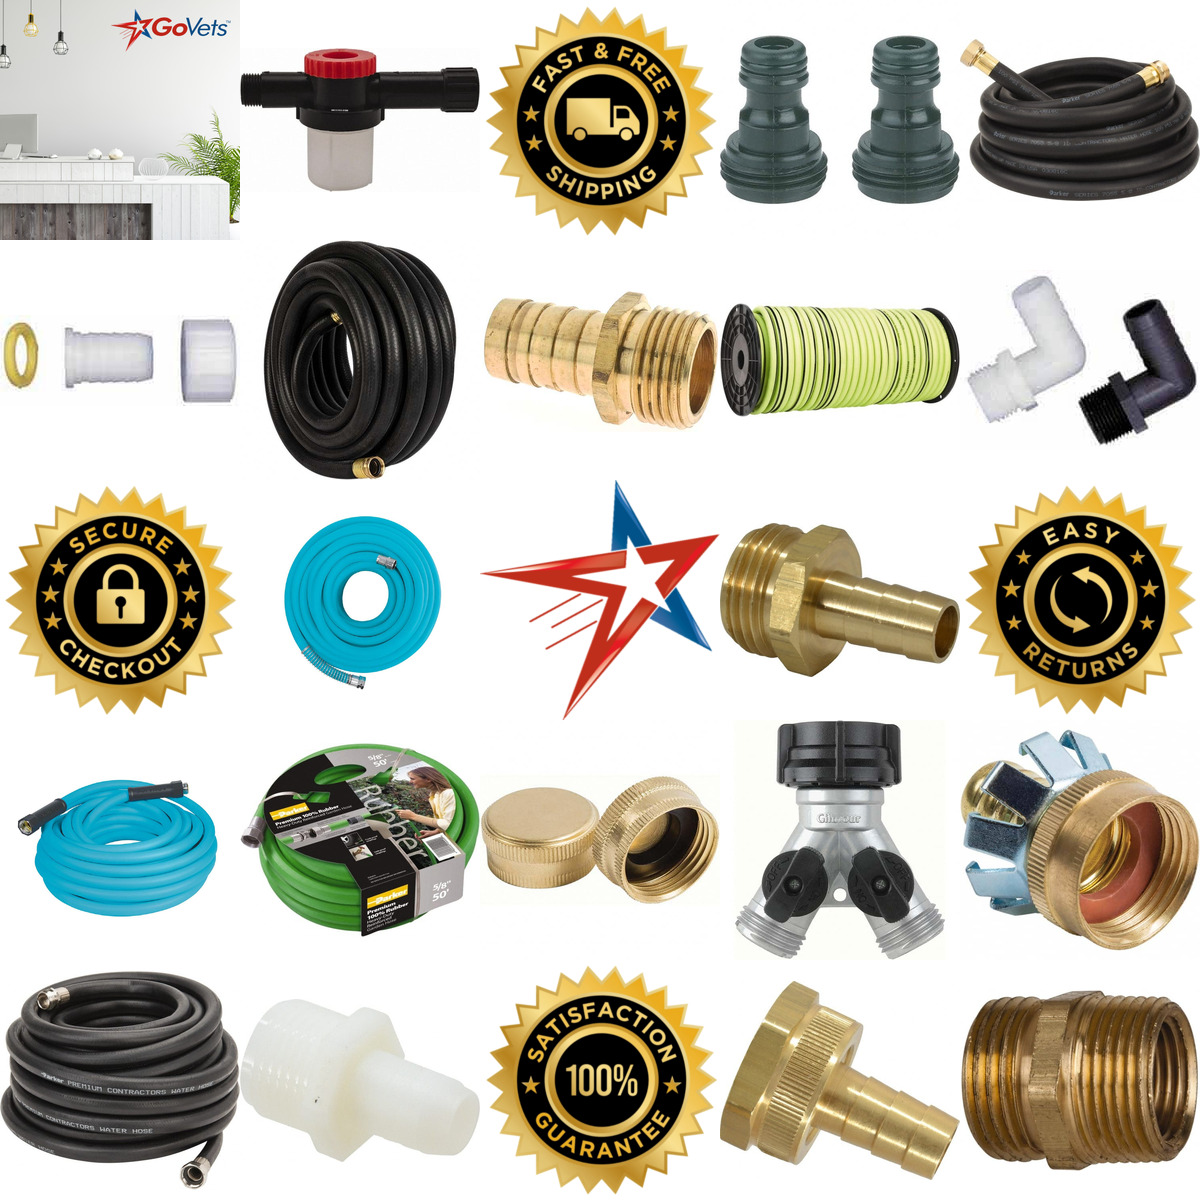 A selection of Garden Hose Fittings Nozzles and Racks products on GoVets